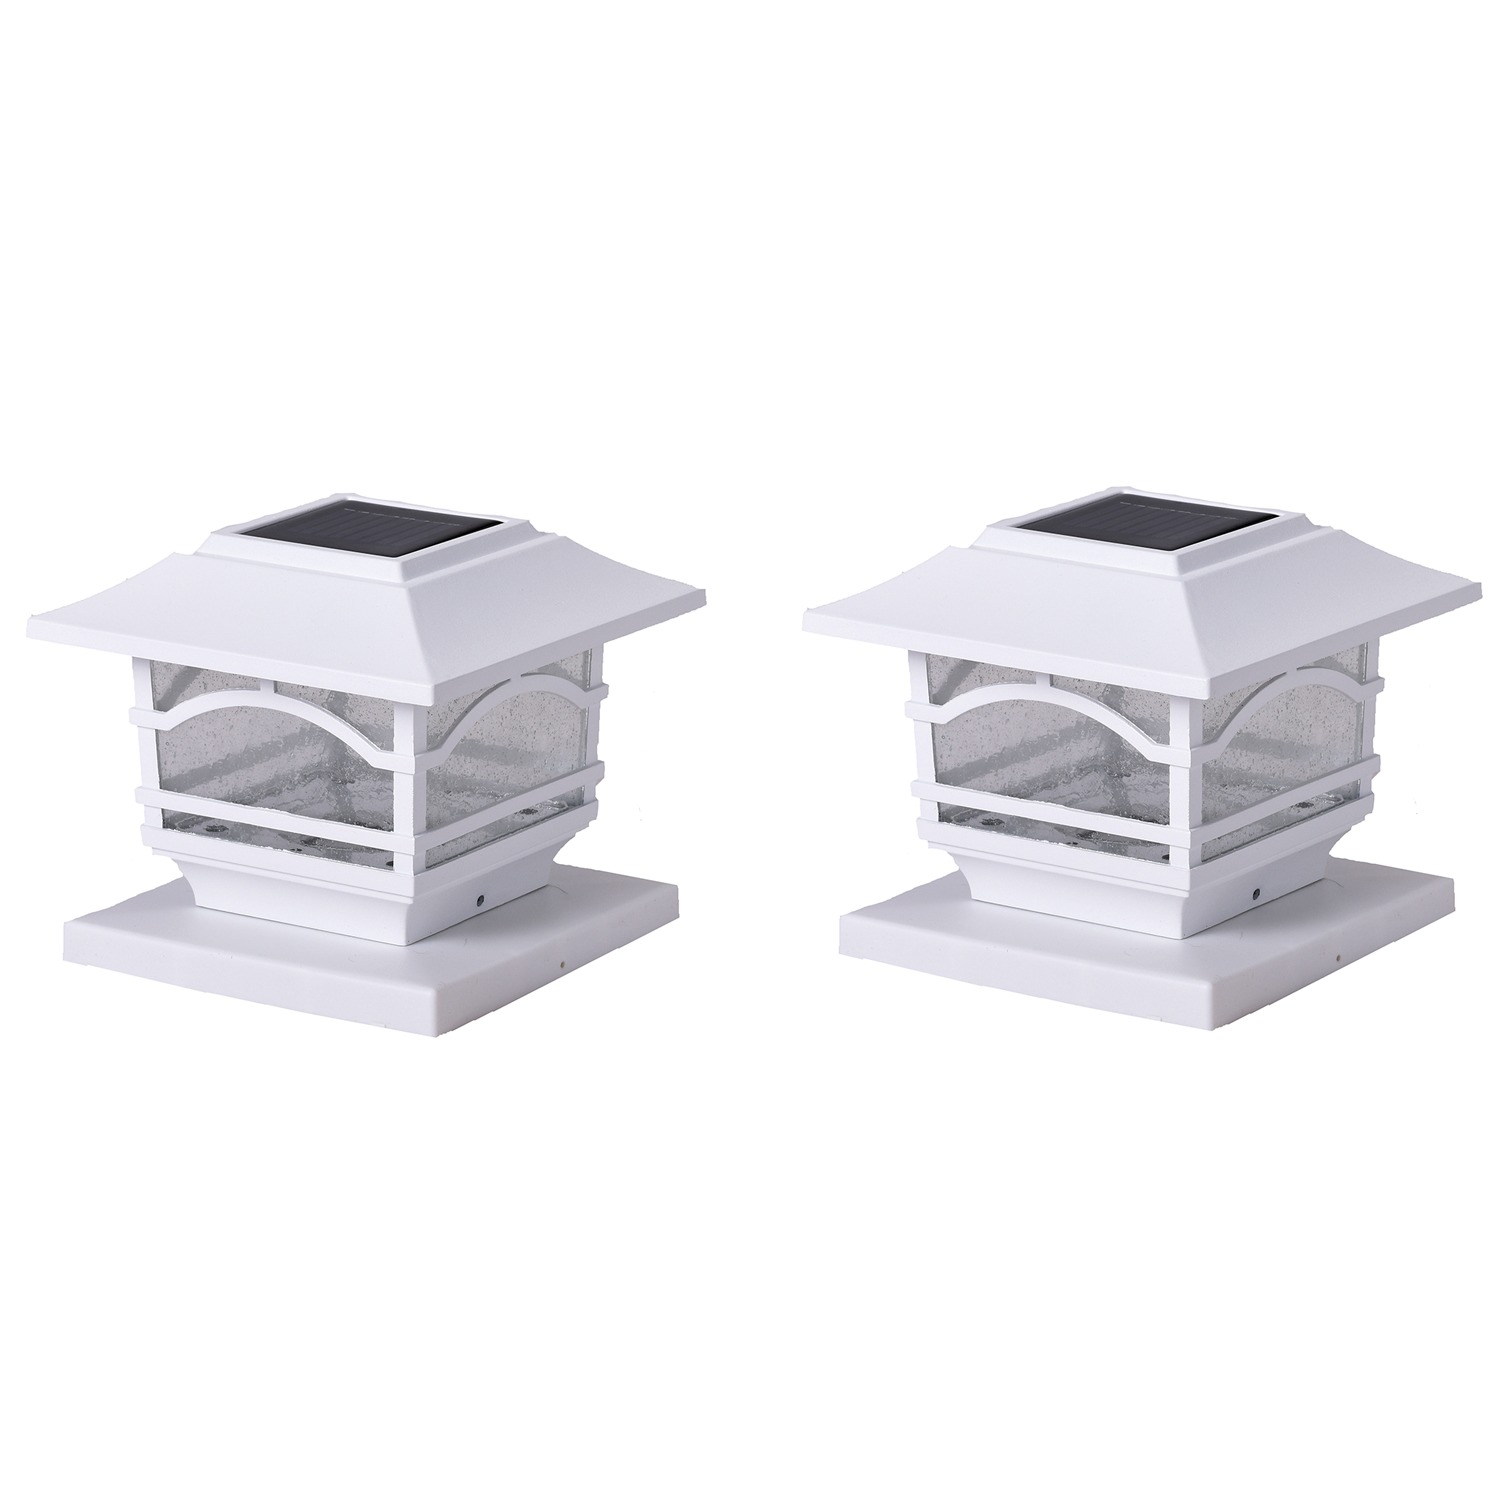 Maxsa® Innovations Maxsa Innovations 41971 Solar Post Cap And Deck Railing Lights 2 Pack (White) - image 2 of 3